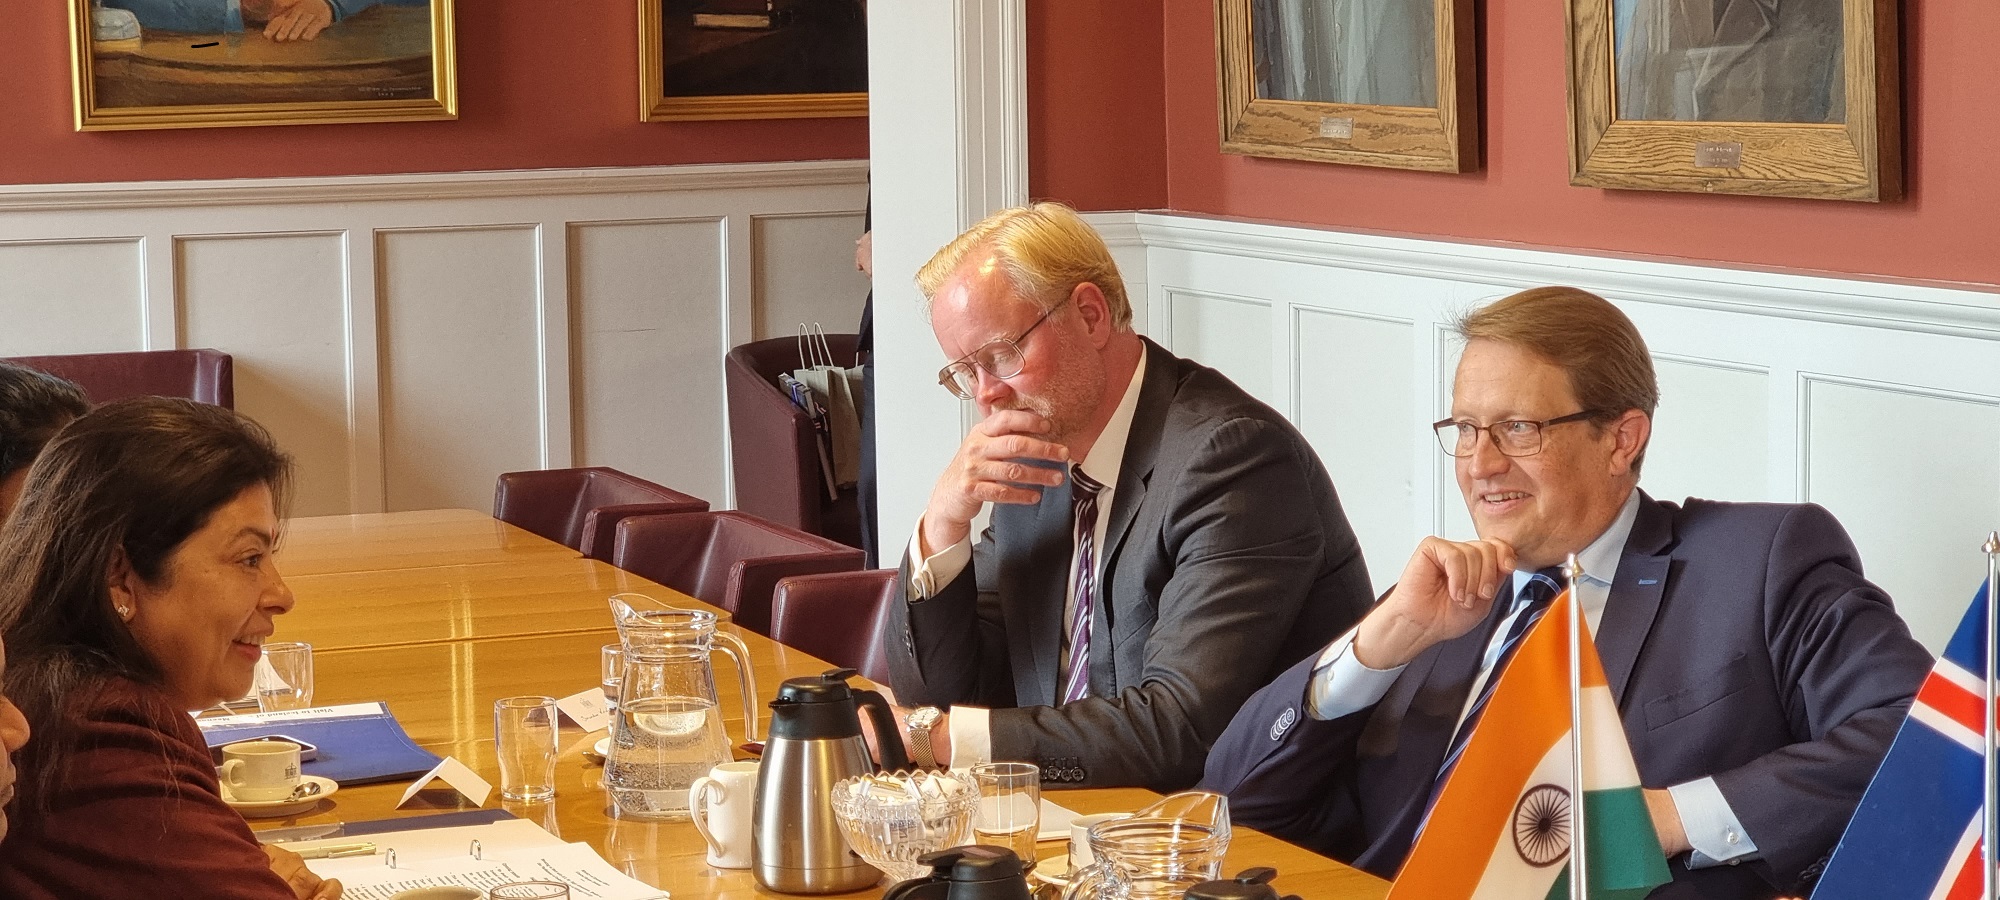 Minister of State for External Affairs and Culture, Smt. Meenakashi lekhi met Mr. Birgir �rmannsson, Speaker of the Icelandic Parliament, 19 August 2022.